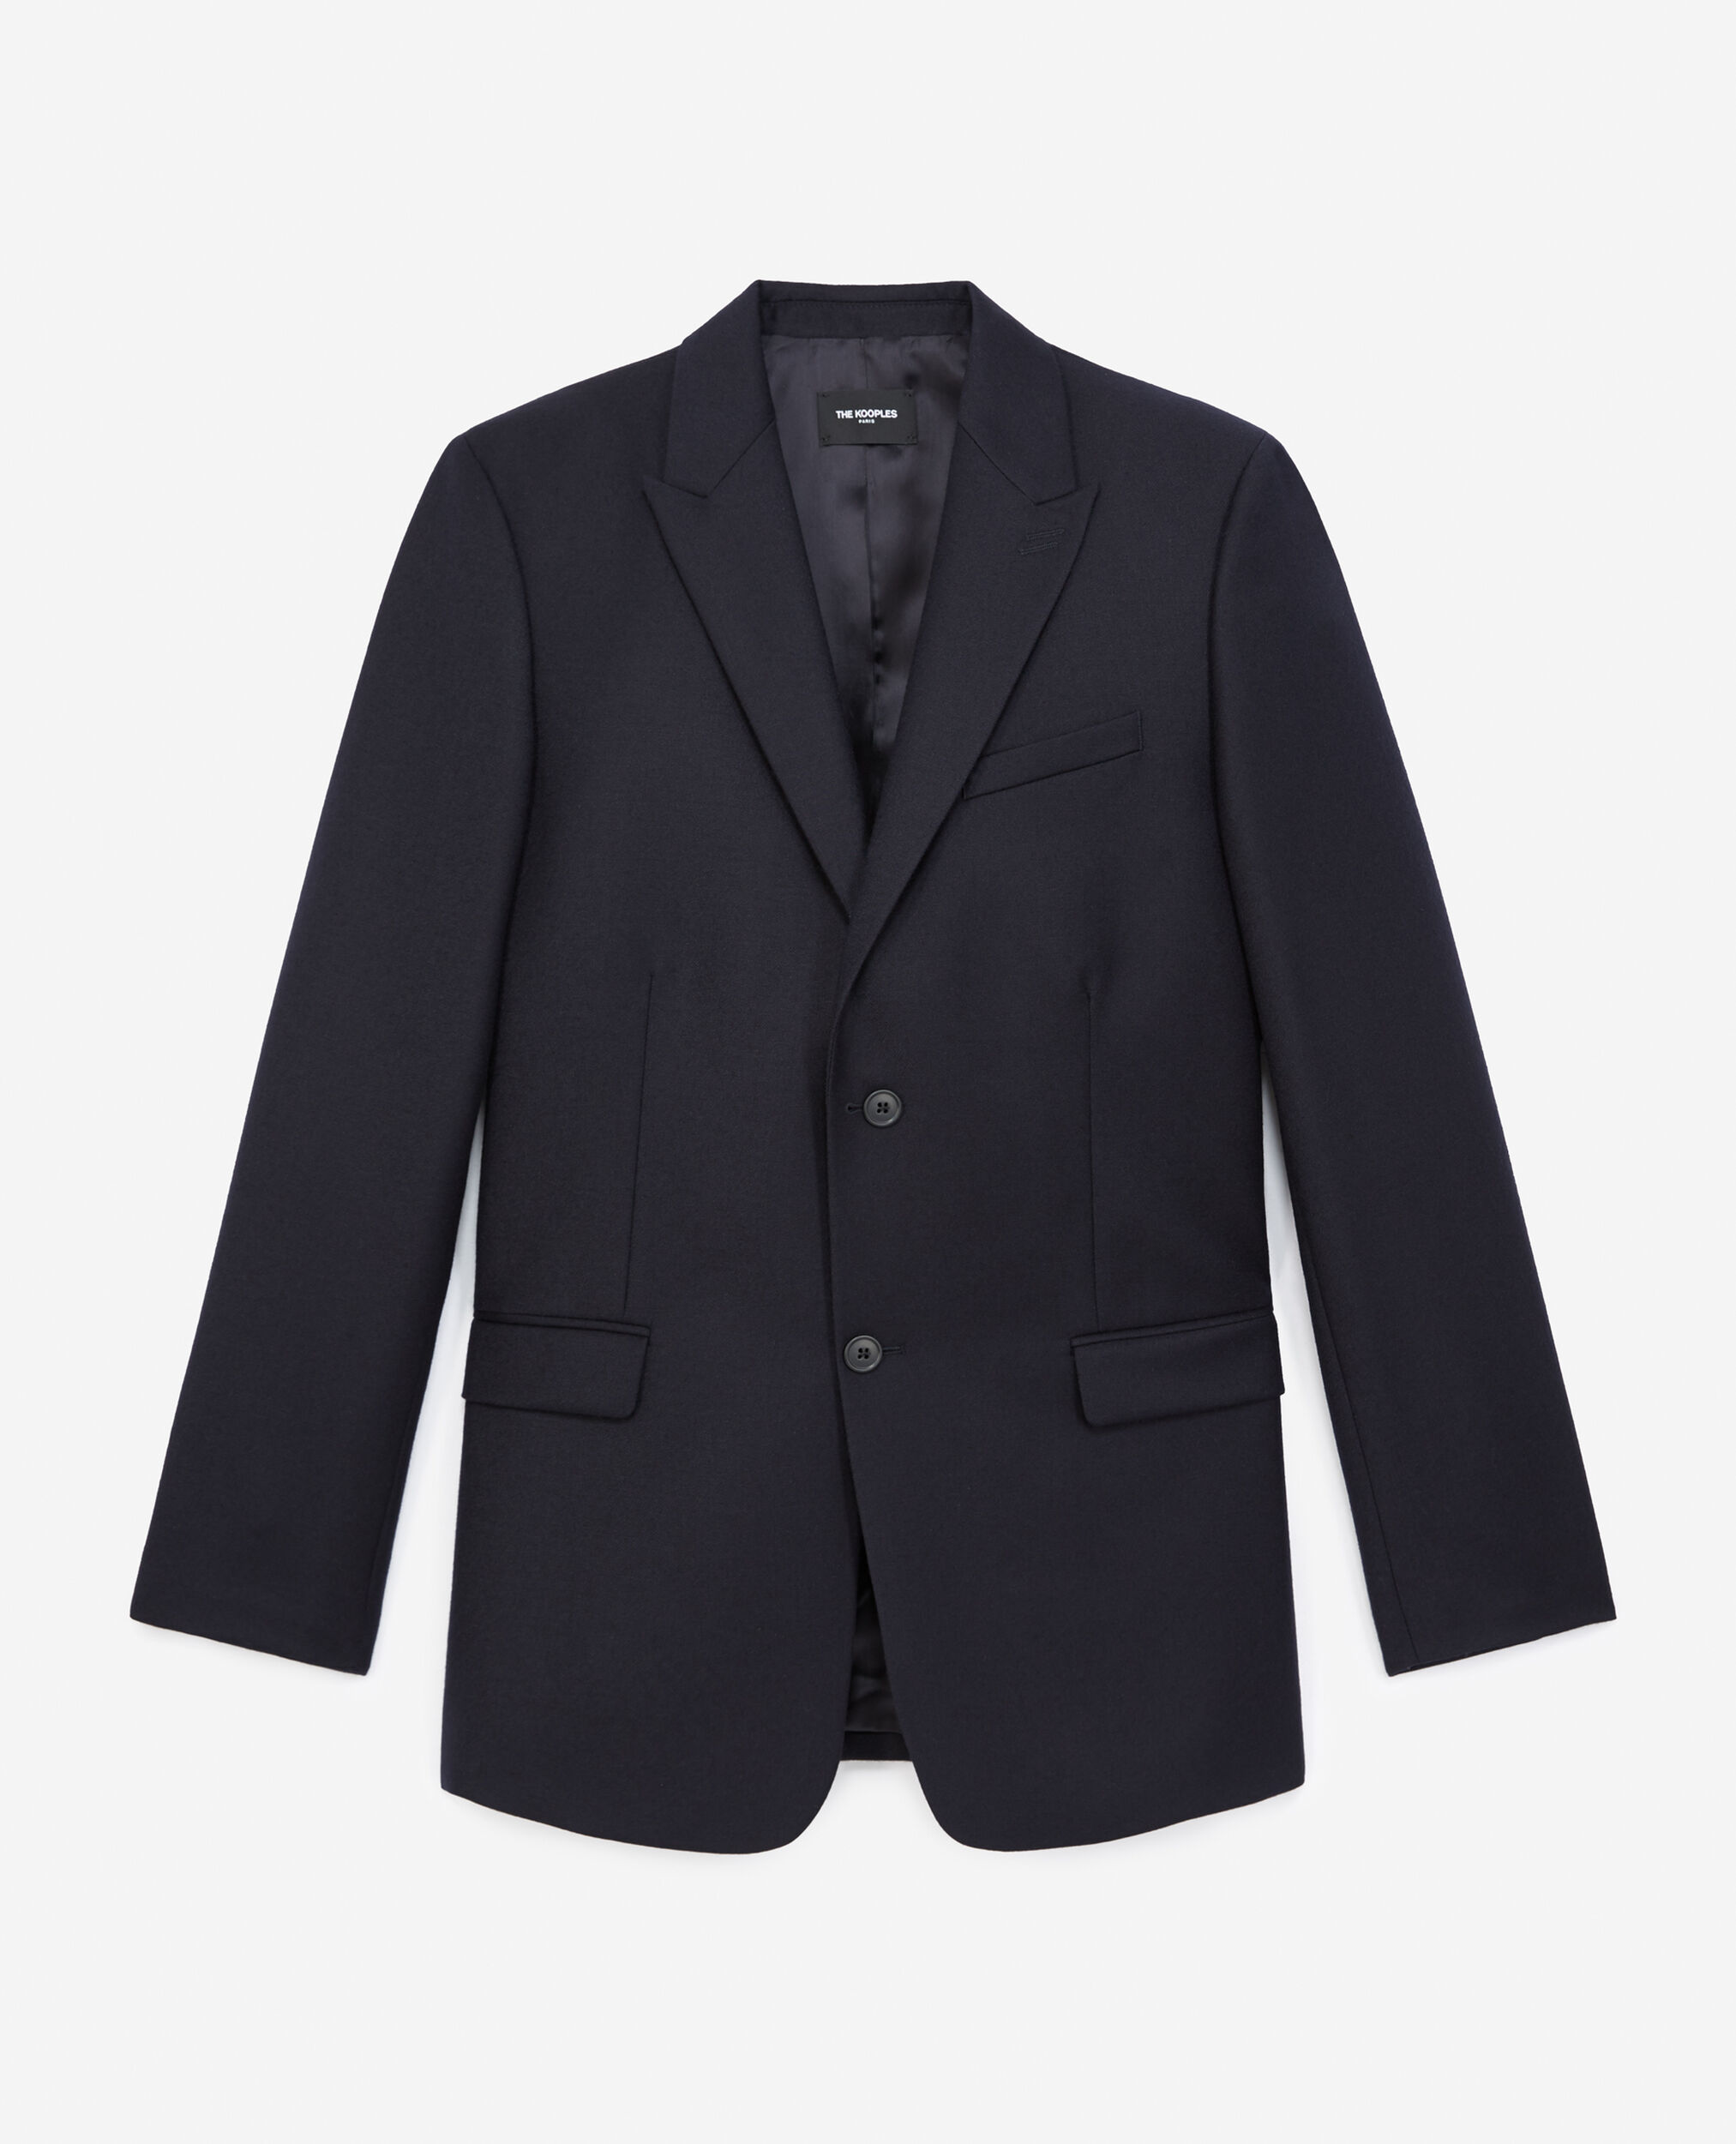 Navy blue jacket with classic collar | The Kooples